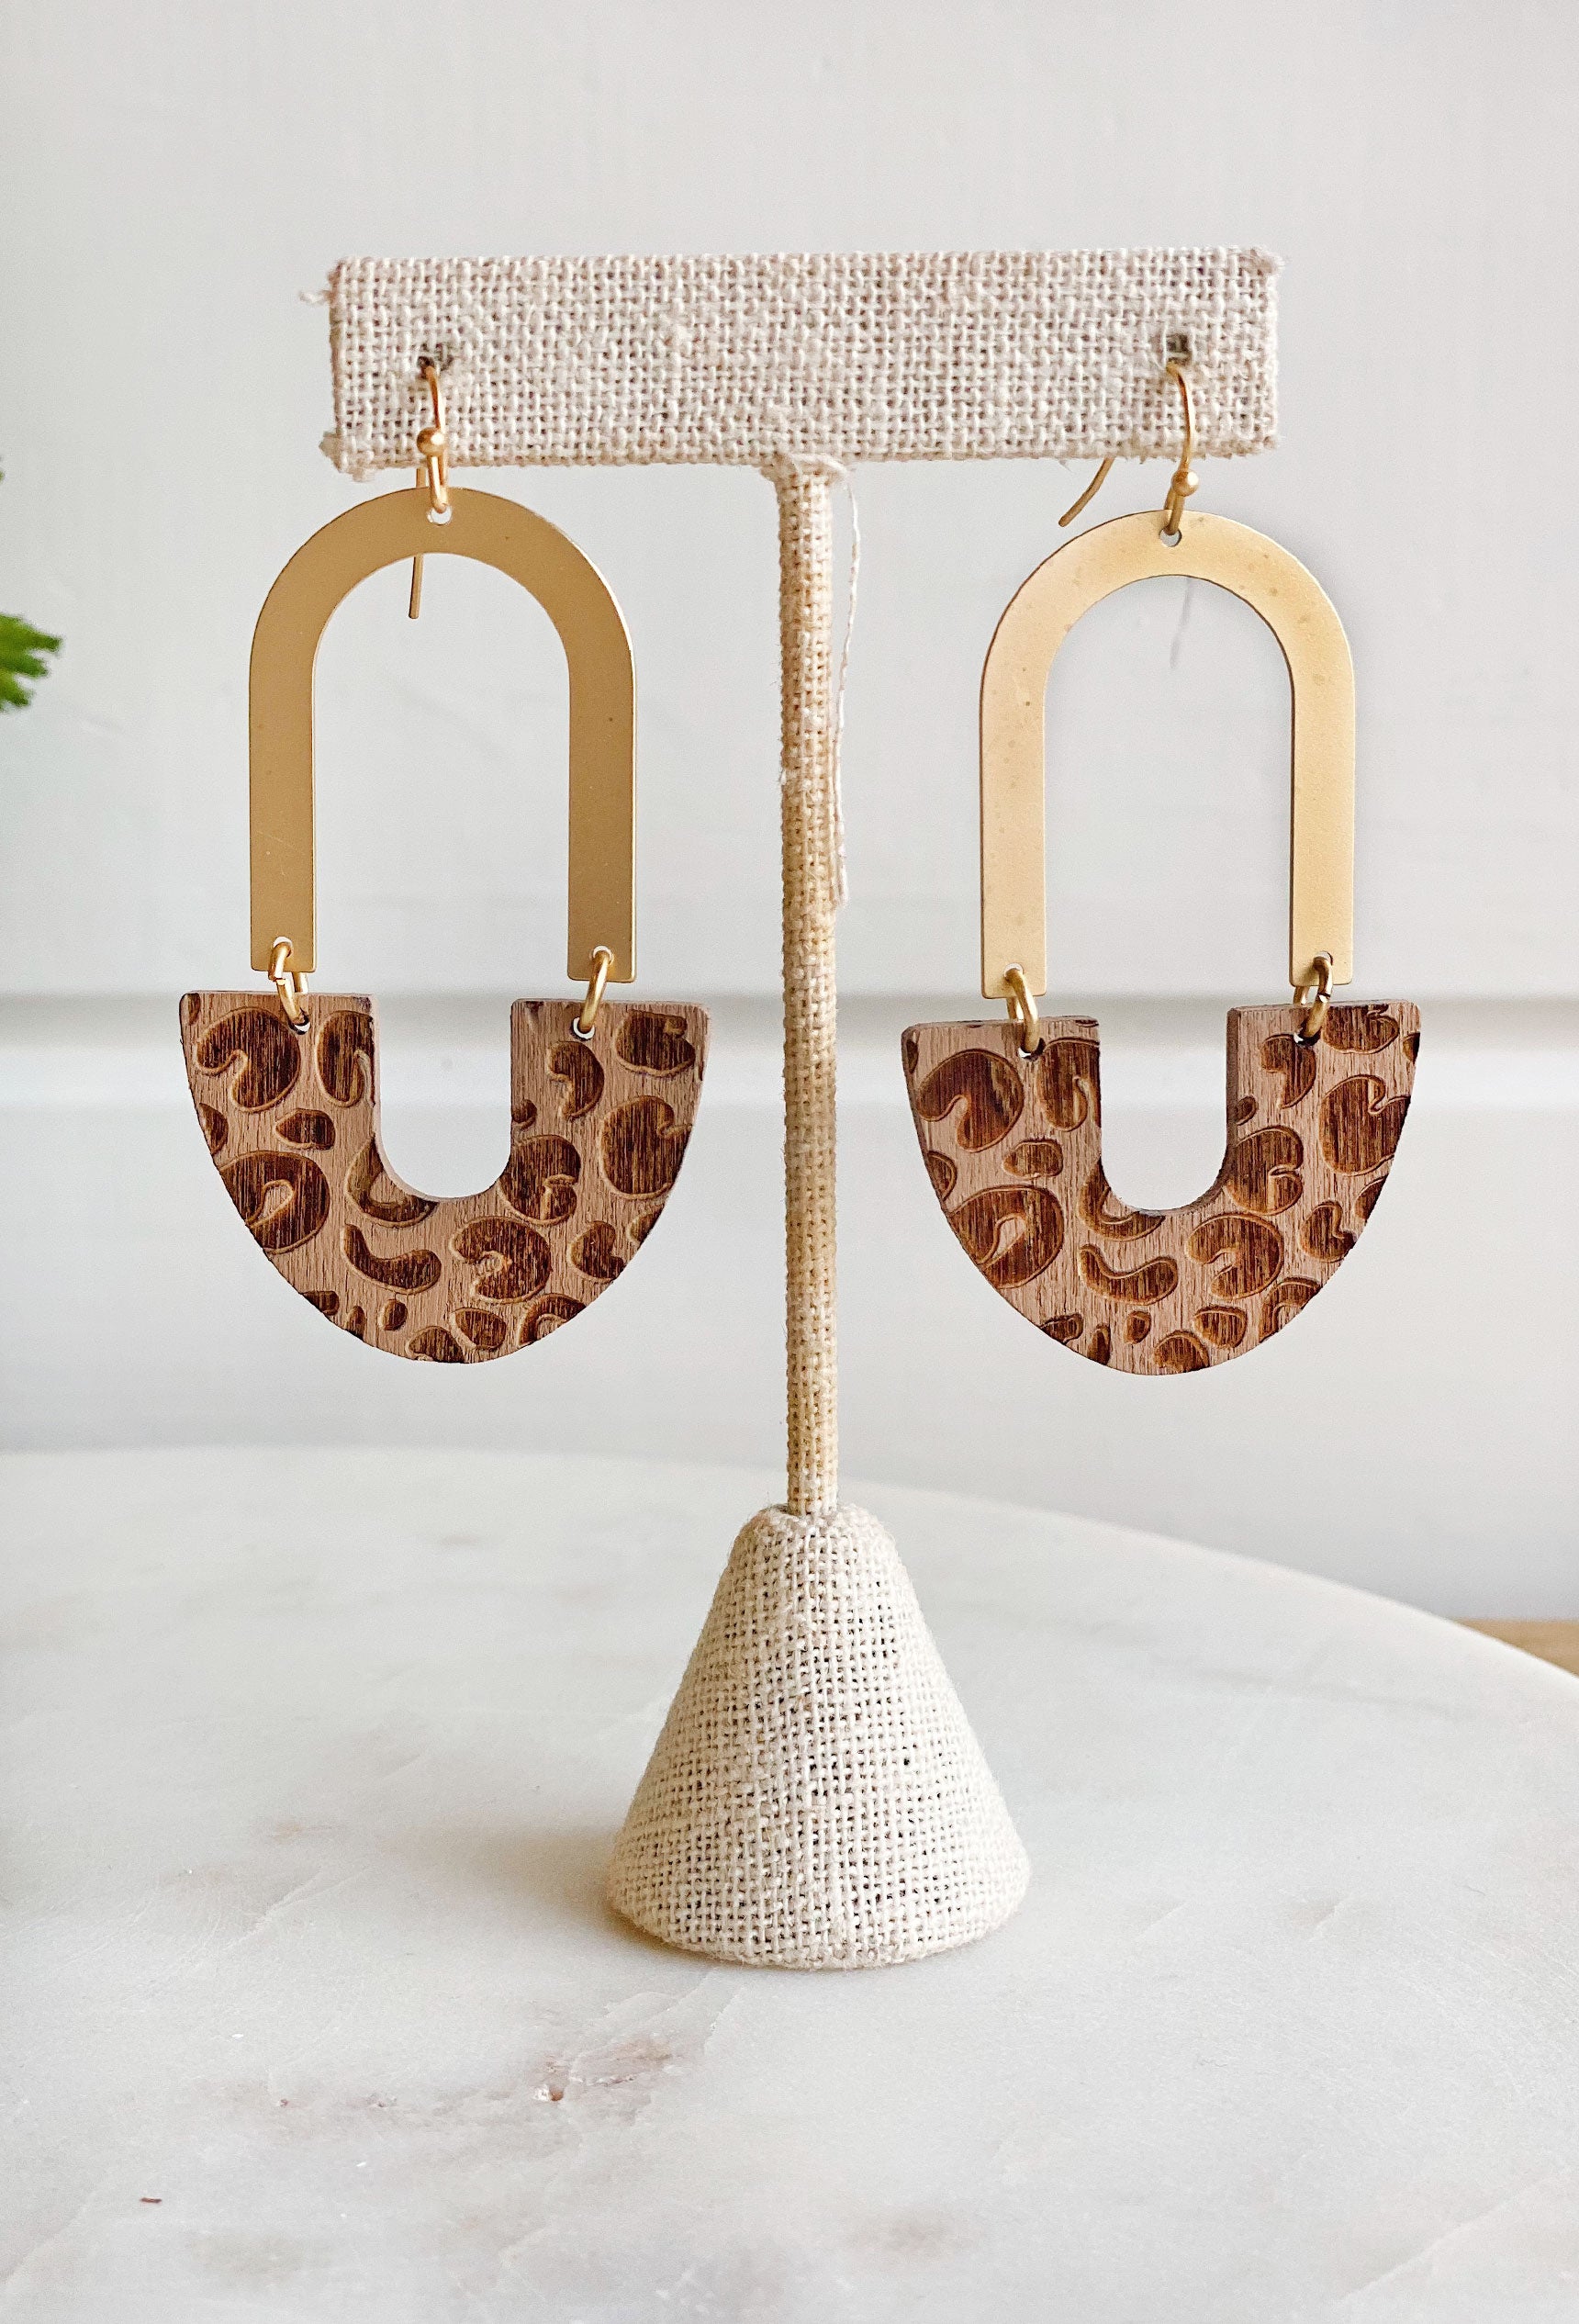 Yours Truly Leopard Earrings, gold and wood earring, wood is engraved with leopard print